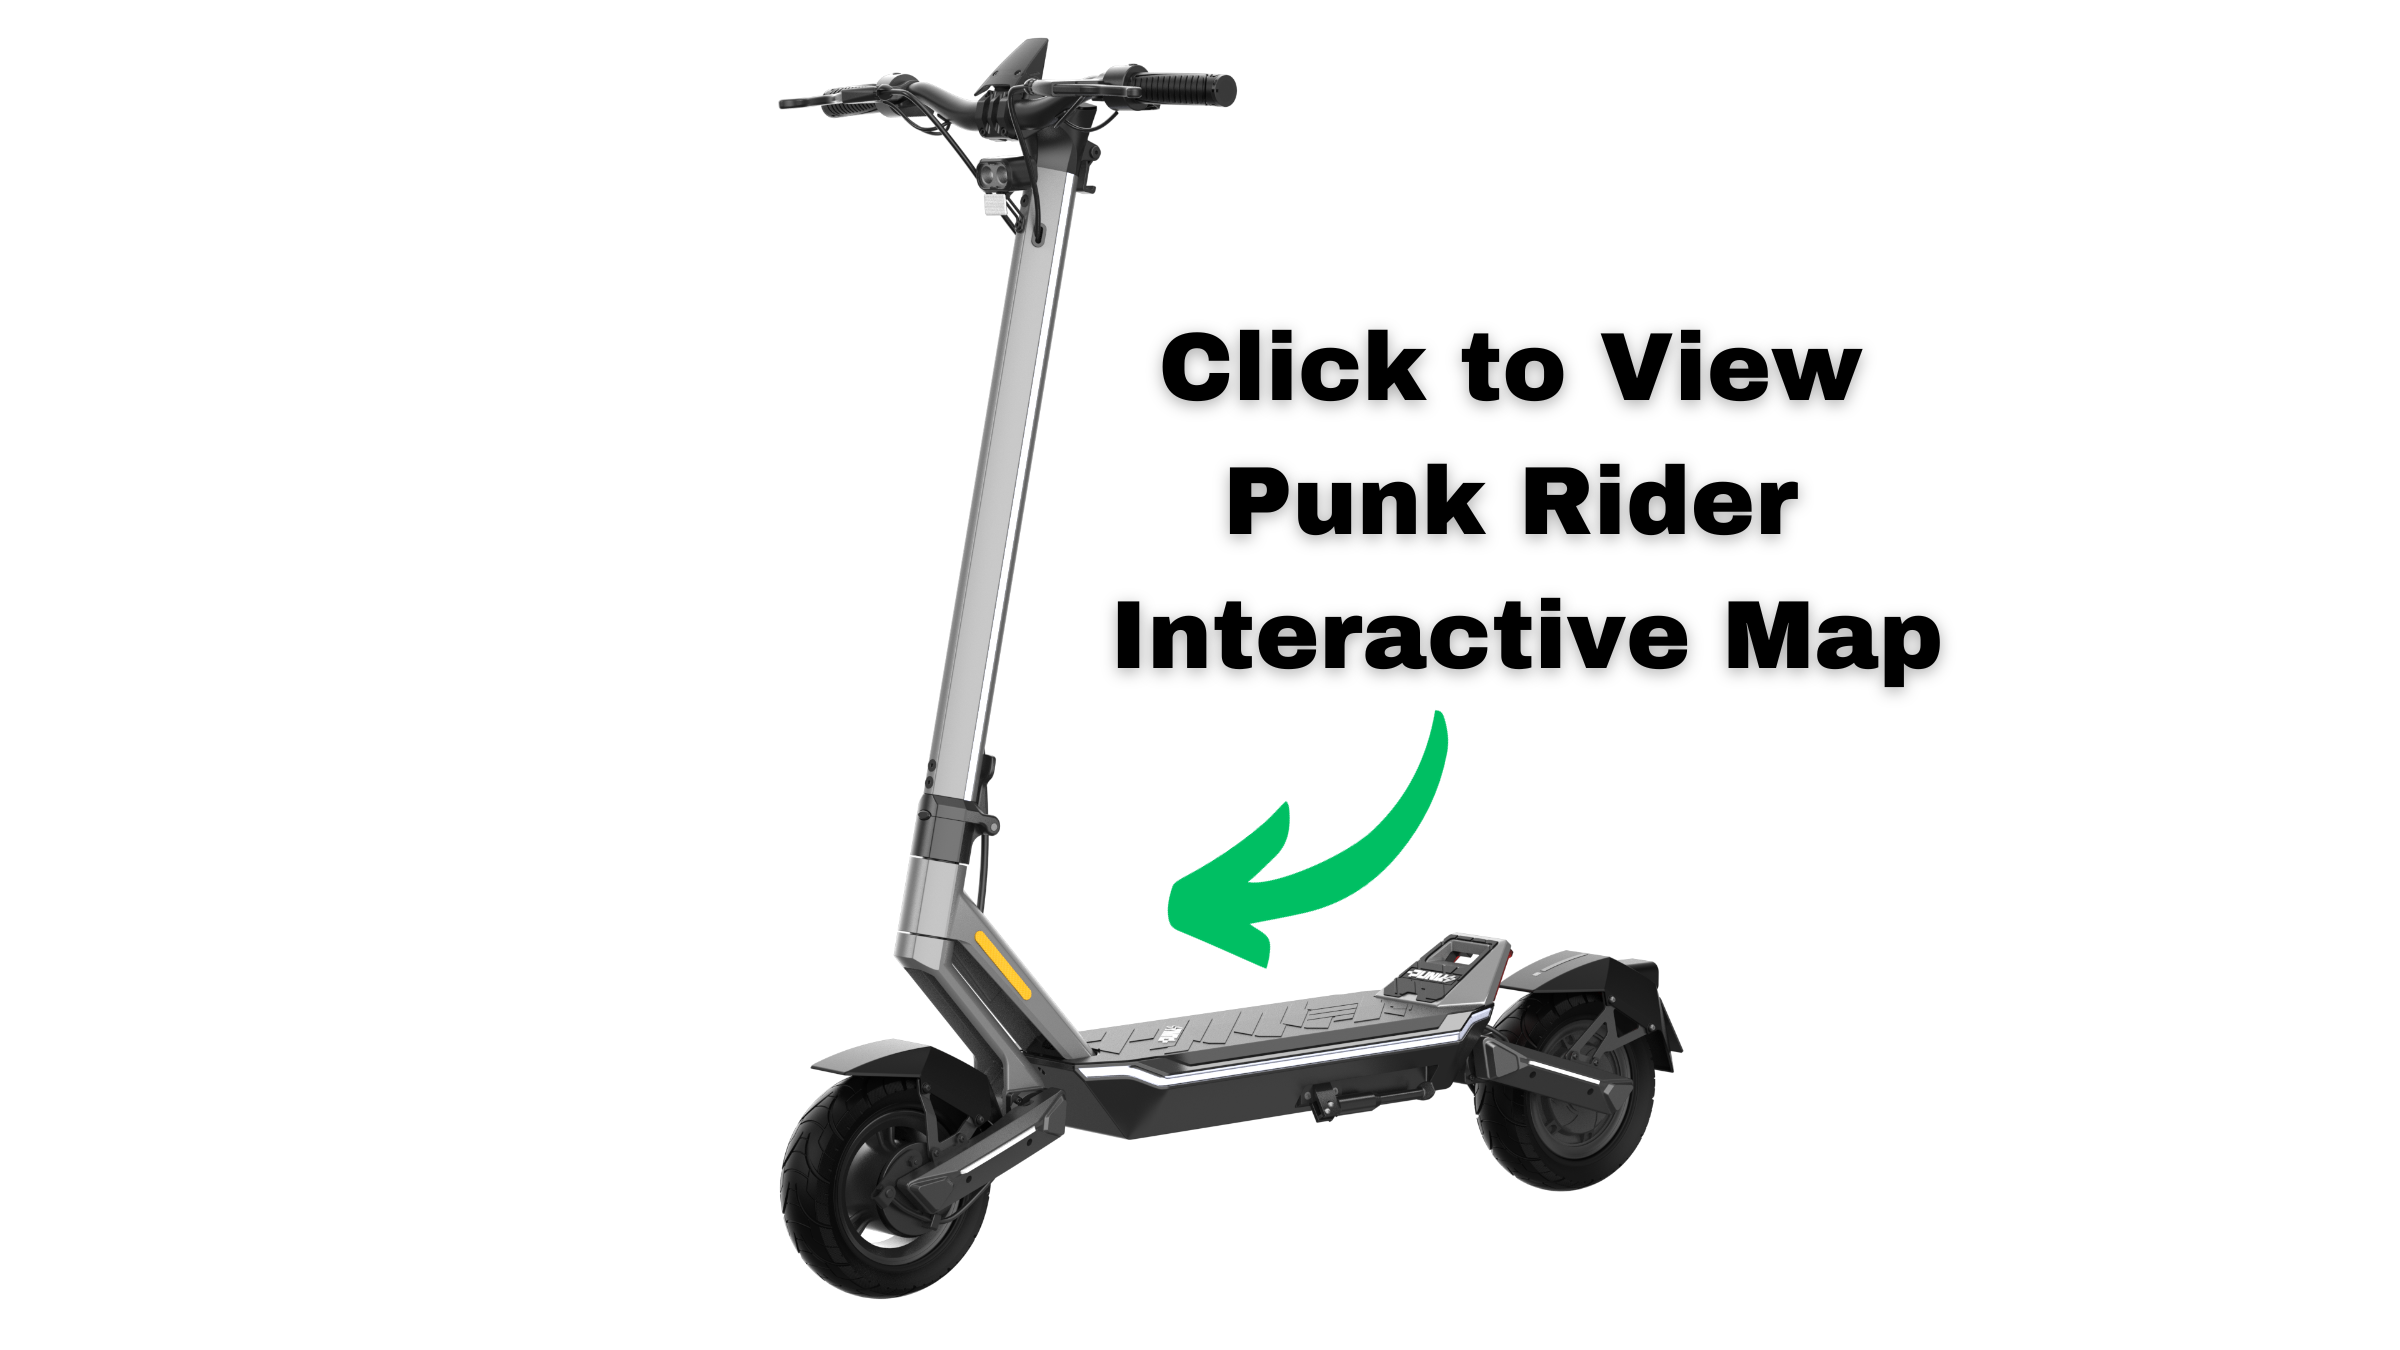 Click to view Punk Rider interactive map